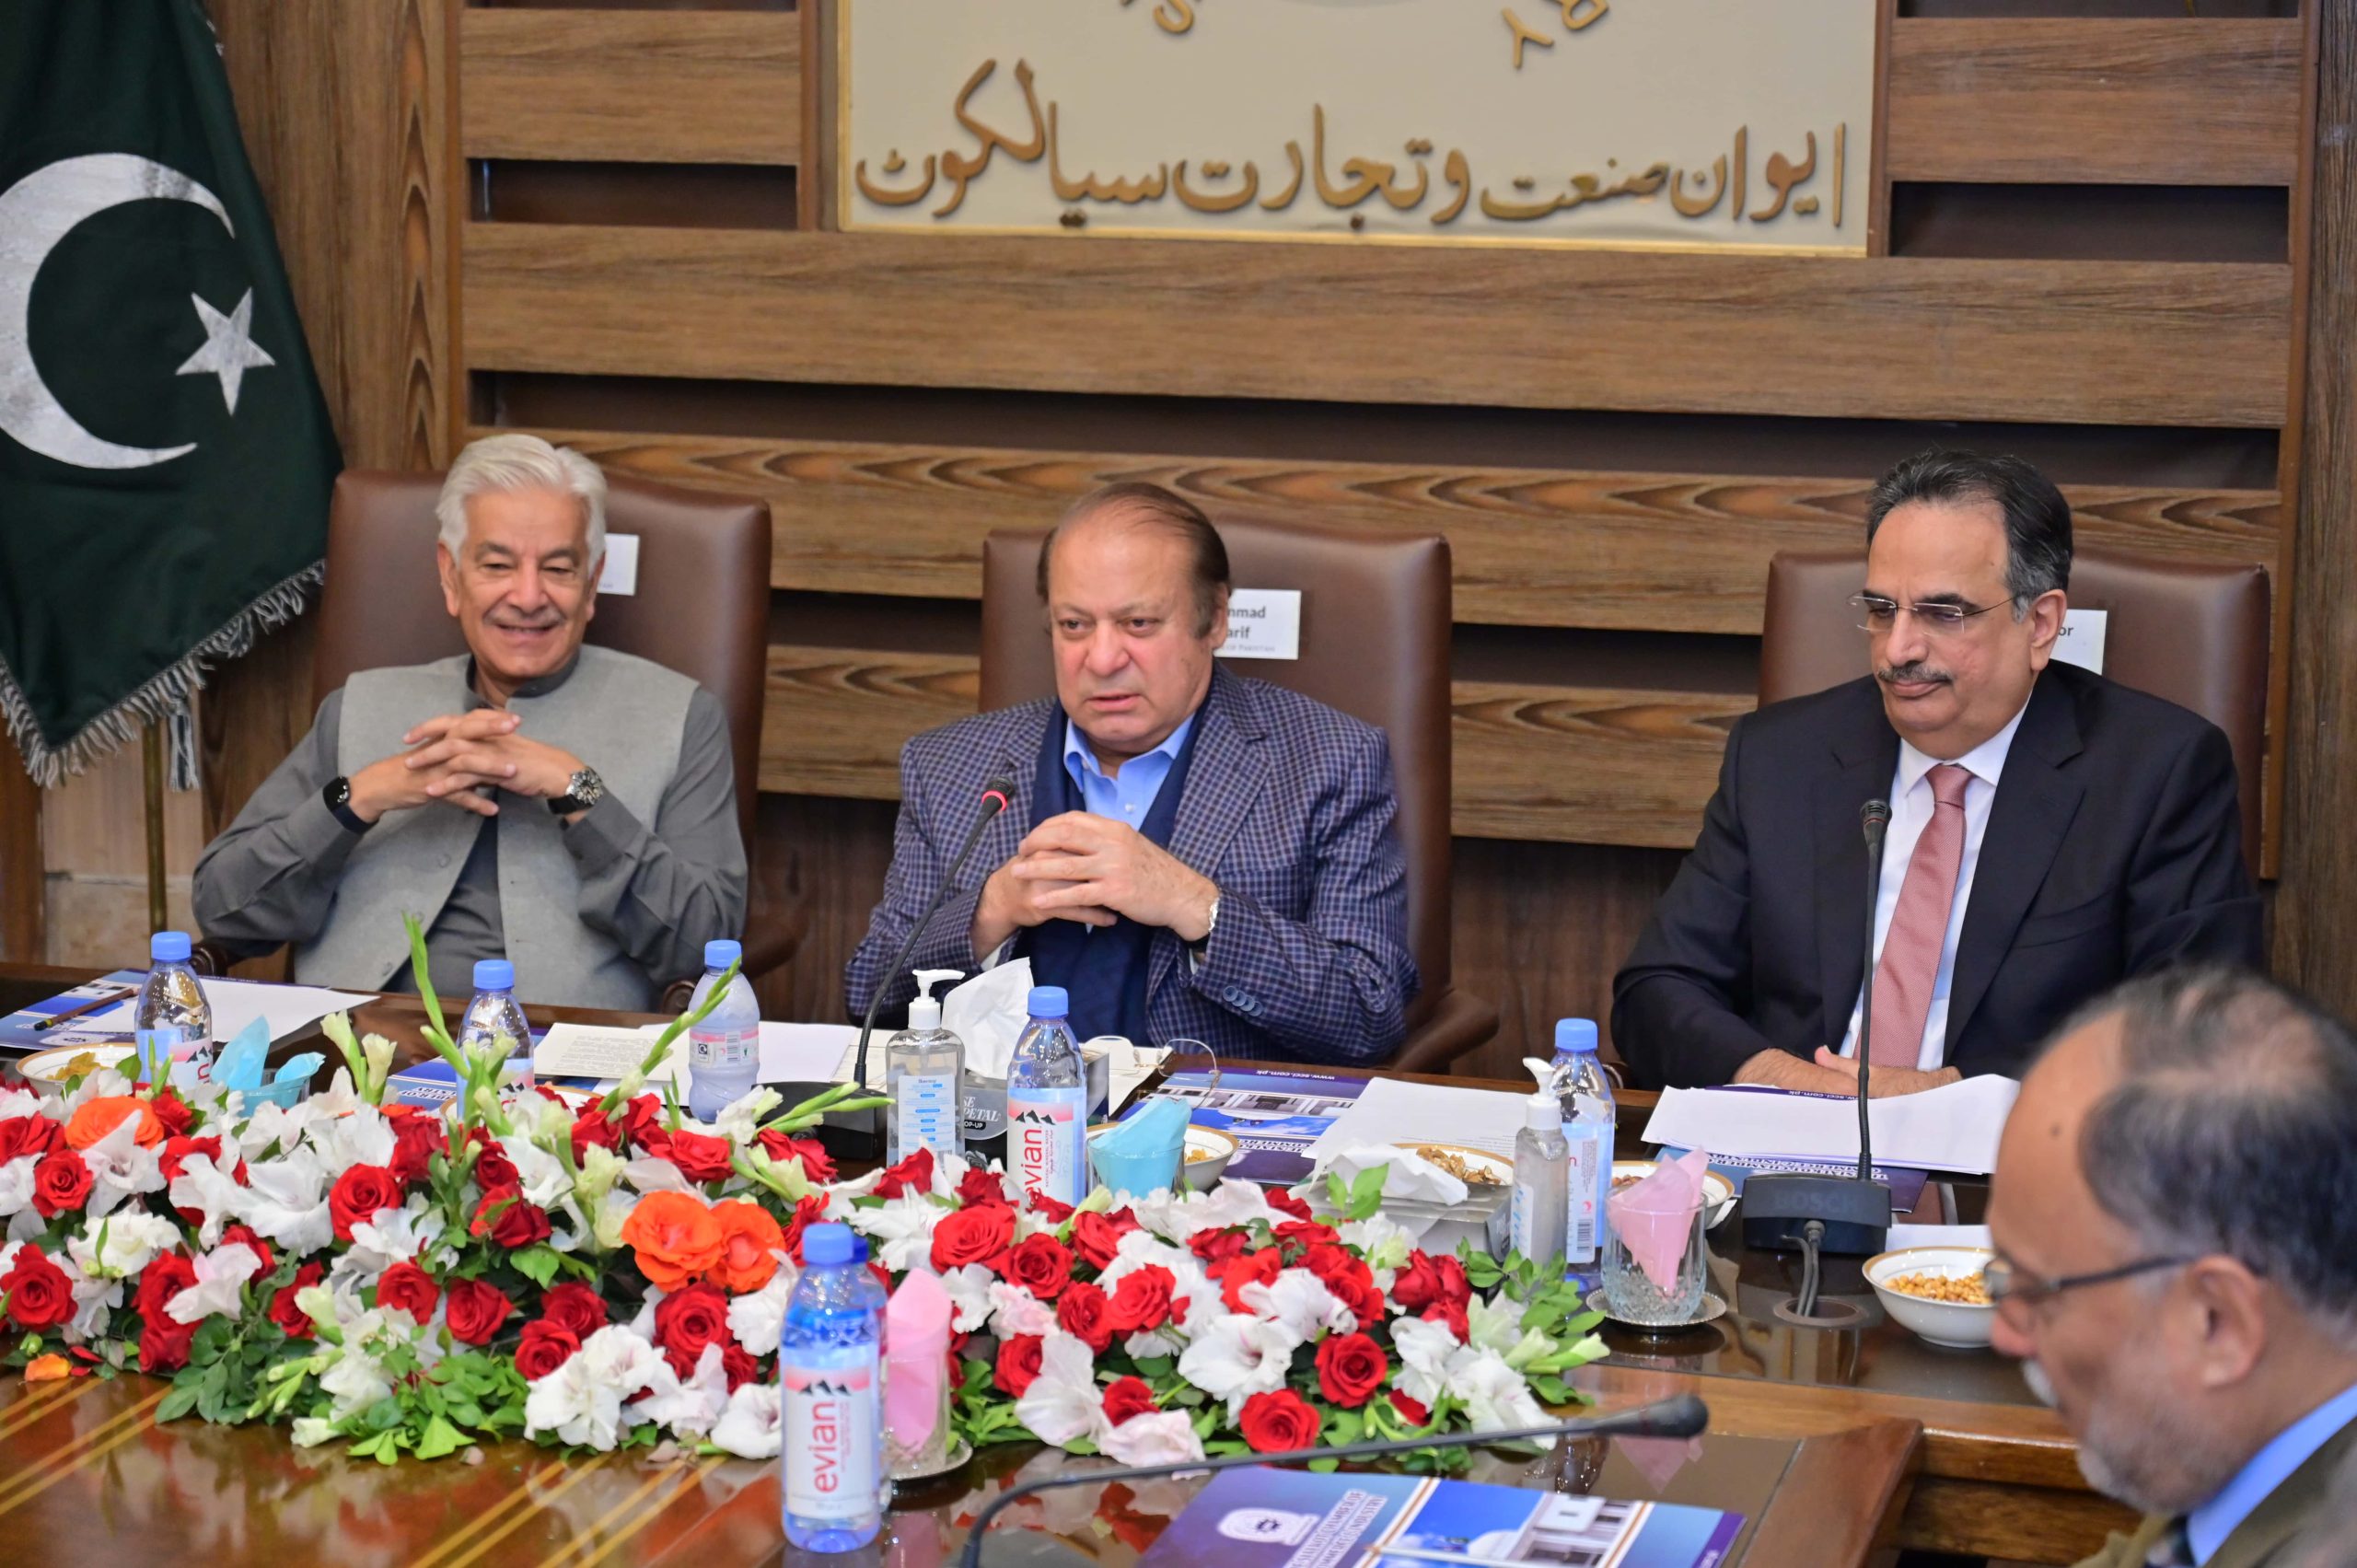 On November 25, 2023, Mian Muhammad Nawaz Sharif, Former Prime Minister of Pakistan, visited the Sialkot Chamber of Commerce and Industry. During his visit, the Former Prime Minister was welcomed by Mr. Abdul Ghafoor Malik, President of SCCI, along with the Business Community of Sialkot. In the address to the event, President SCCI stressed the need for a sustainable and long-term economic plan to promote exports and encourage import substitution. Mr. Abdul Ghafoor Malik also shed light on the various infrastructural needs of the district Sialkot with the affirmation that the exports could double in the years to come provided that an enabling environment is created.  Mian Muhammad Nawaz Sharif commended the invaluable contributions of the esteemed business community of Sialkot, recognizing their pivotal role in fortifying the bedrock of our national economy. In his address, he underscored Pakistan’s vast potential for exponential growth, emphasizing the indispensable need for a resolute and unwavering strategy in navigating critical spheres such as economy and social progress. His unwavering commitment was palpable as he articulated his steadfast dedication to fostering an environment conducive to bolstering exports and propelling industrial advancement, all in pursuit of a thriving and prosperous future for the nation.